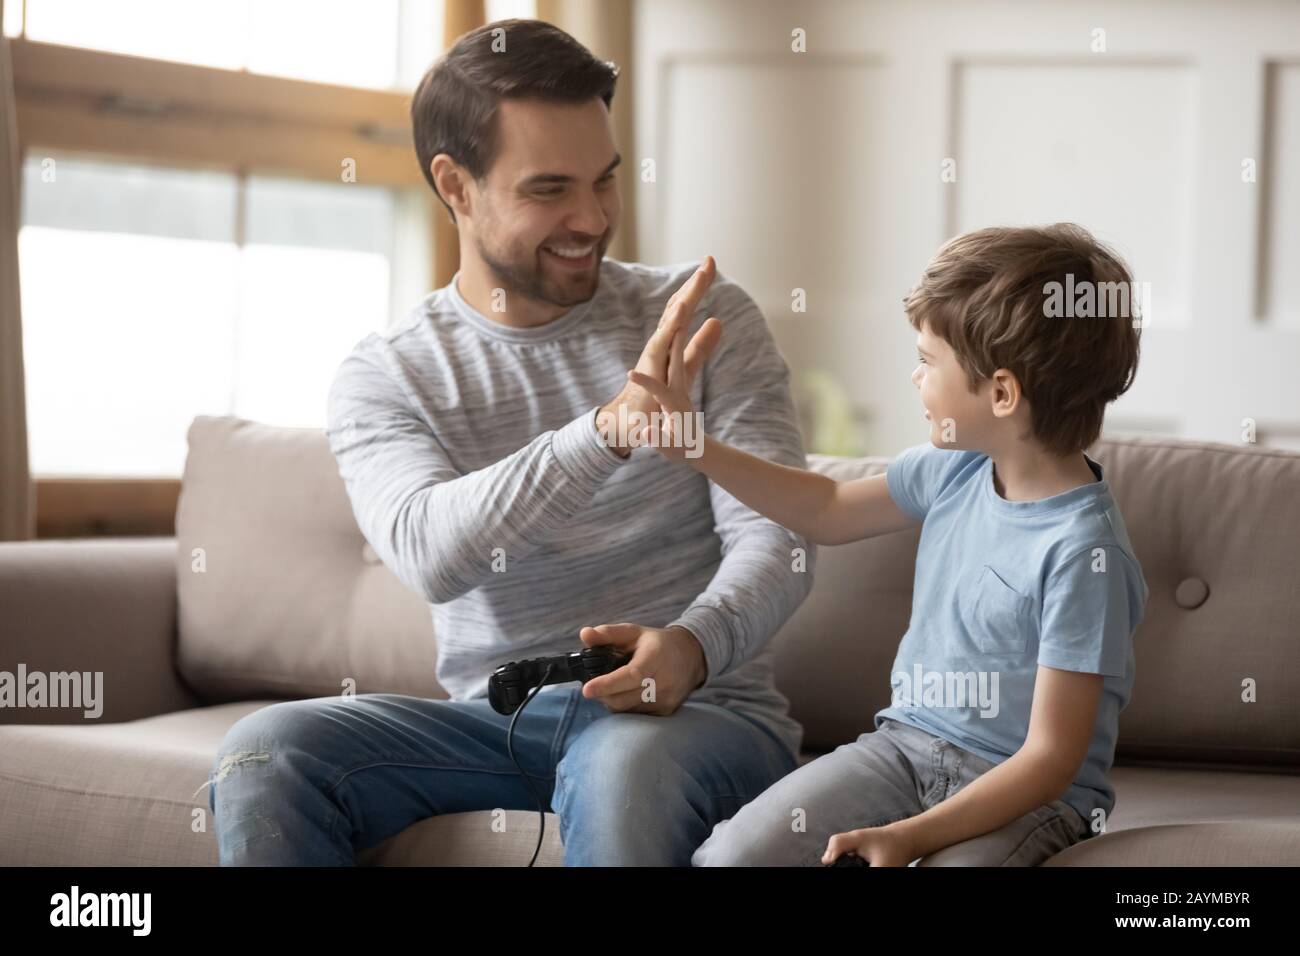 Excited young father giving high five to happy little son. Stock Photo